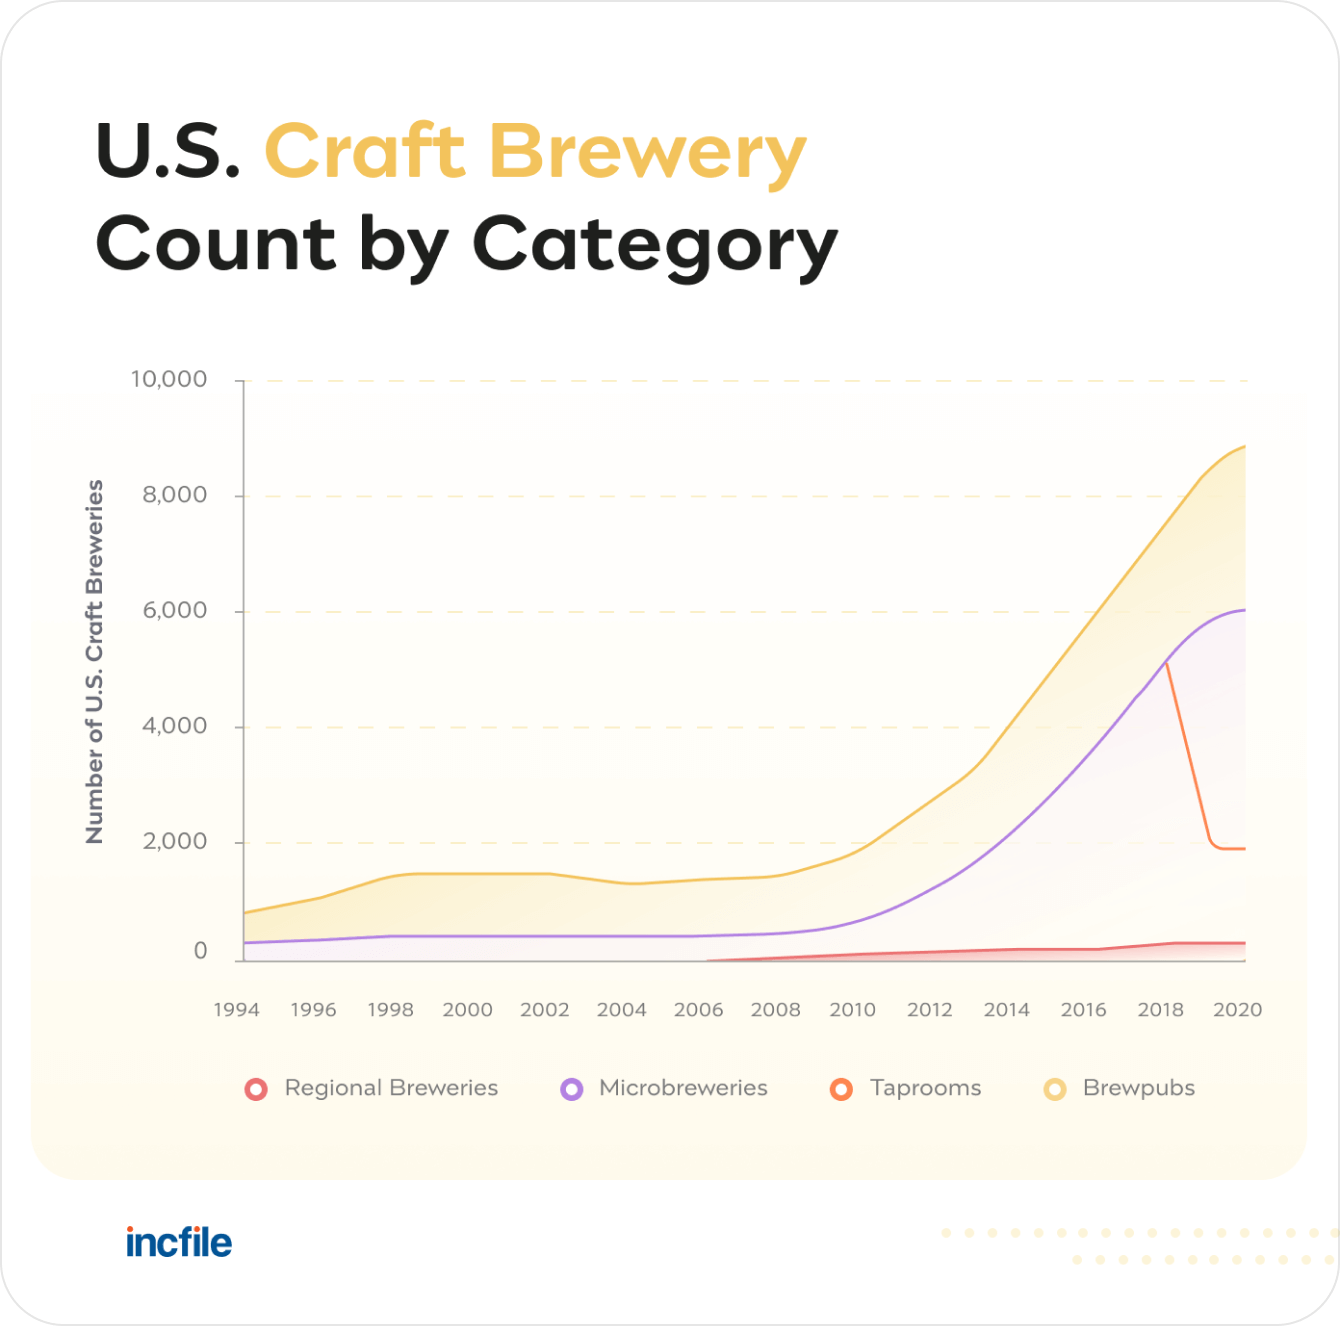 U.S. Craft Brewery Count by Category